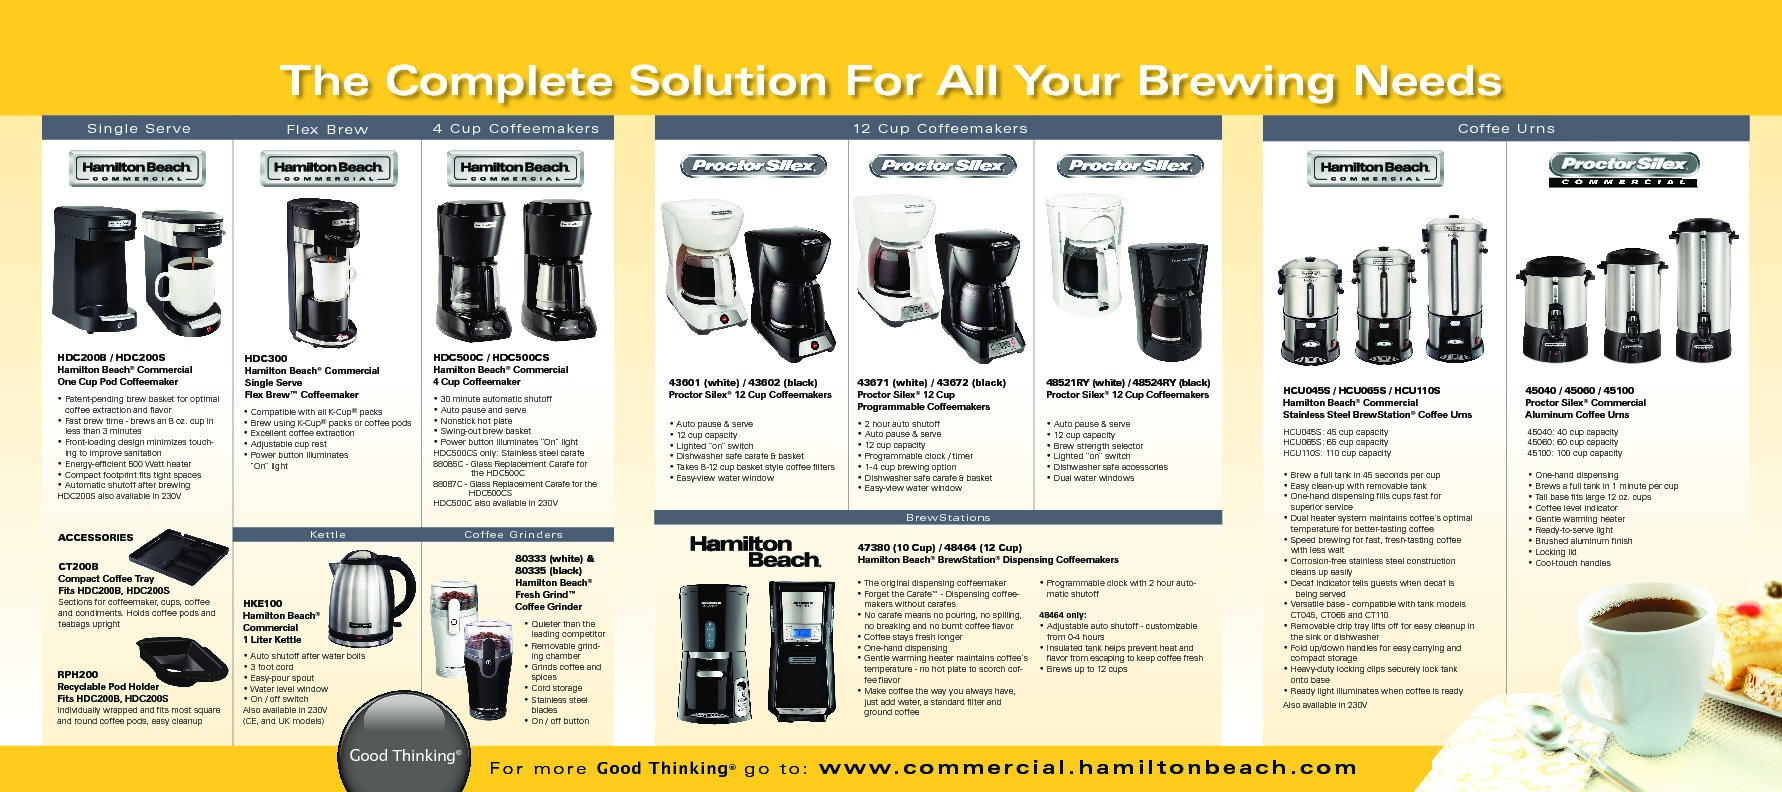 4 Cup Hospitality Rated Coffee Maker, Auto Shut Off, Swing Out/Lift Off  Brew Basket, Black w/ Stainless Steel Carafe